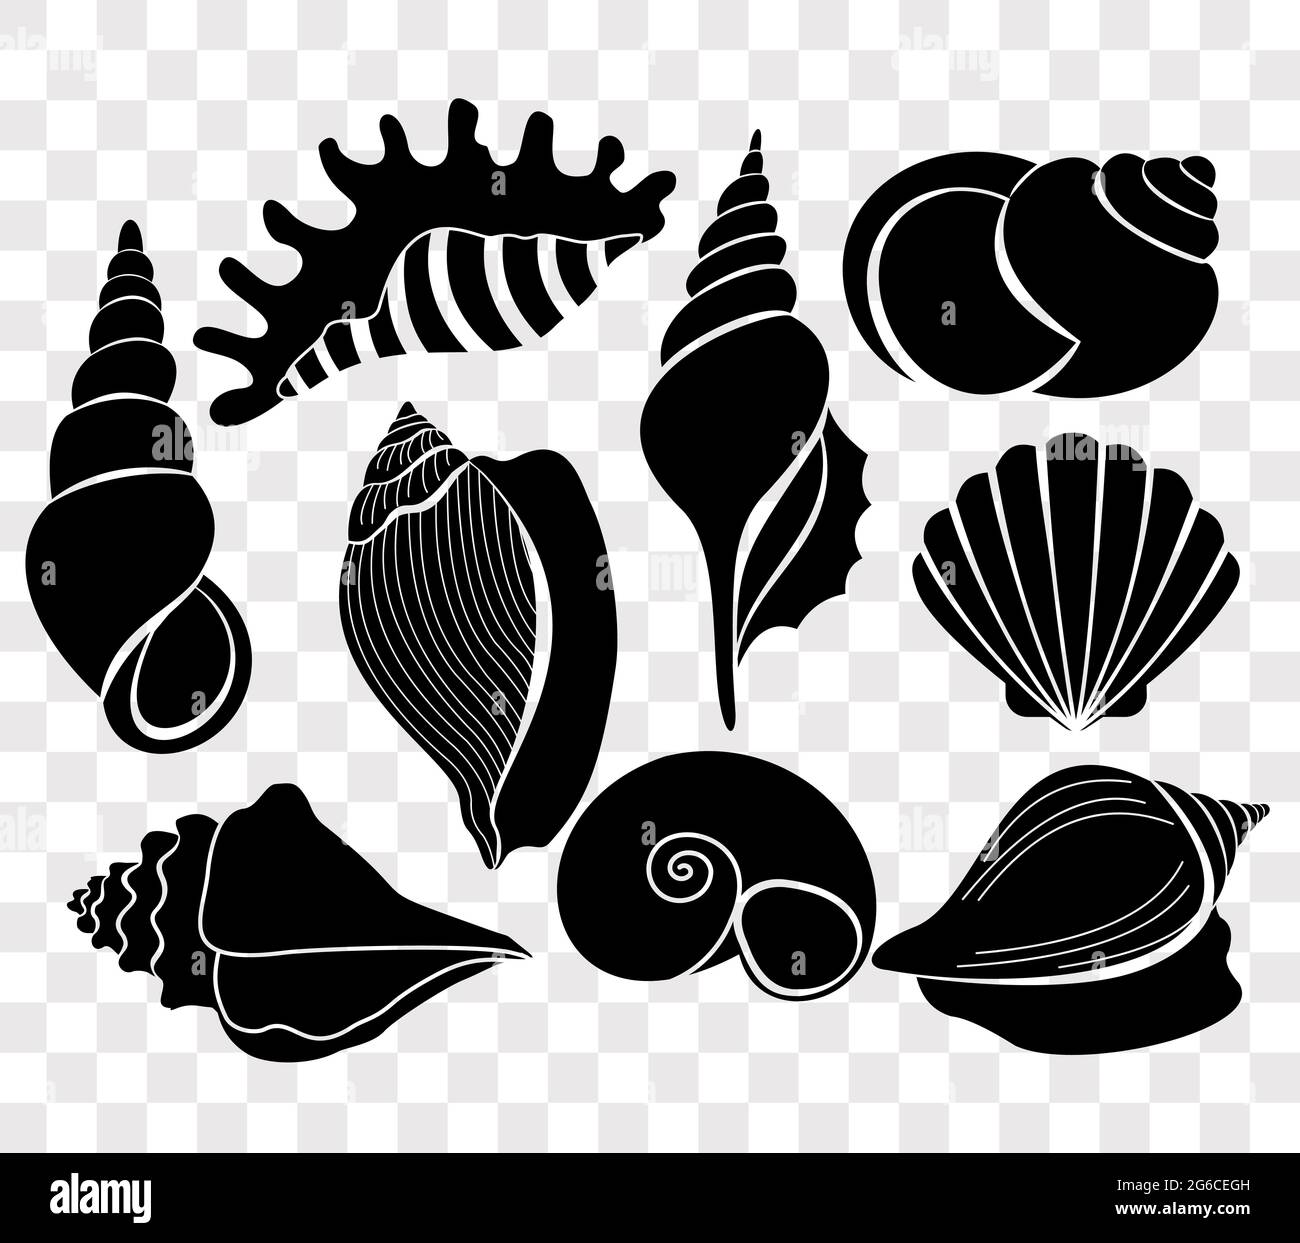 Set of Seashells. Big hand drawn Bundle of Sea Shells on isolated  background. Collection of Cockleshells and starfish. Drawing of underwater  life. Elements for design in marine style 22128250 Vector Art at